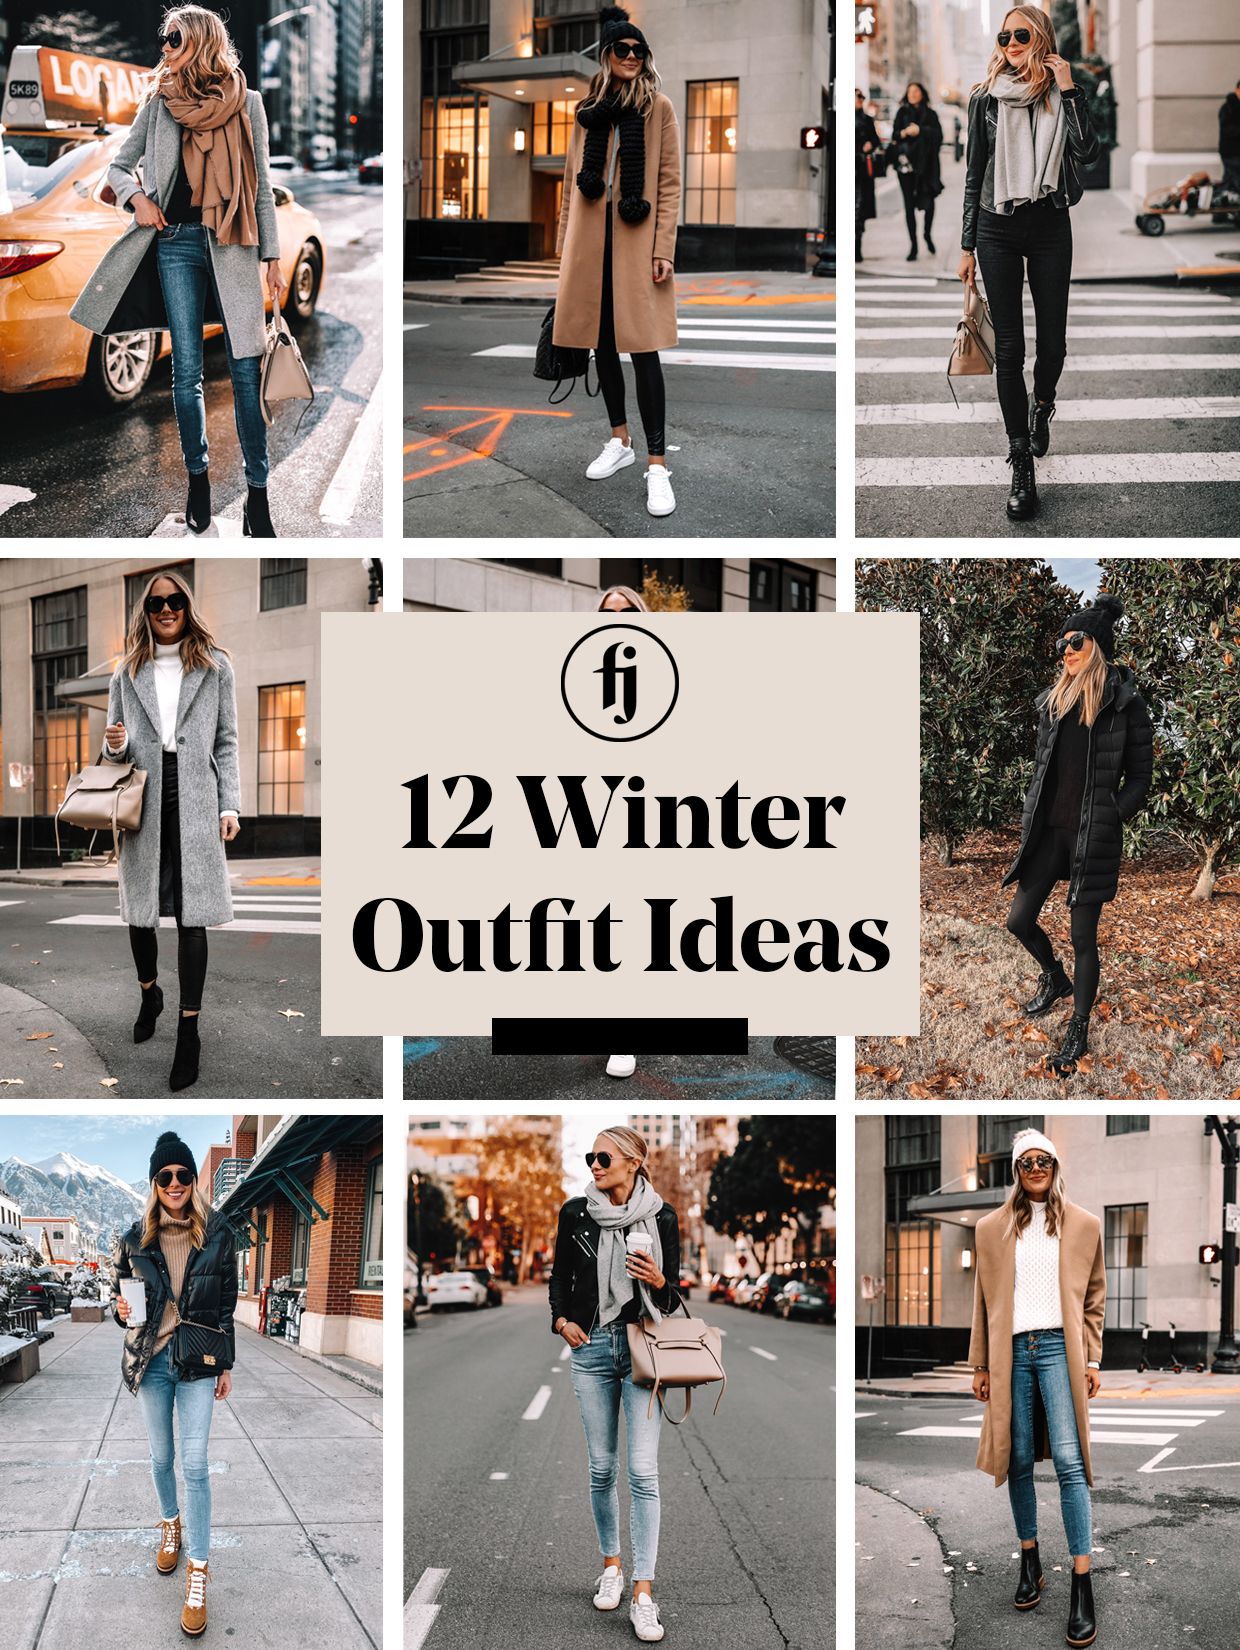 Stay Stylish This Winter with These Fashionable Outfits